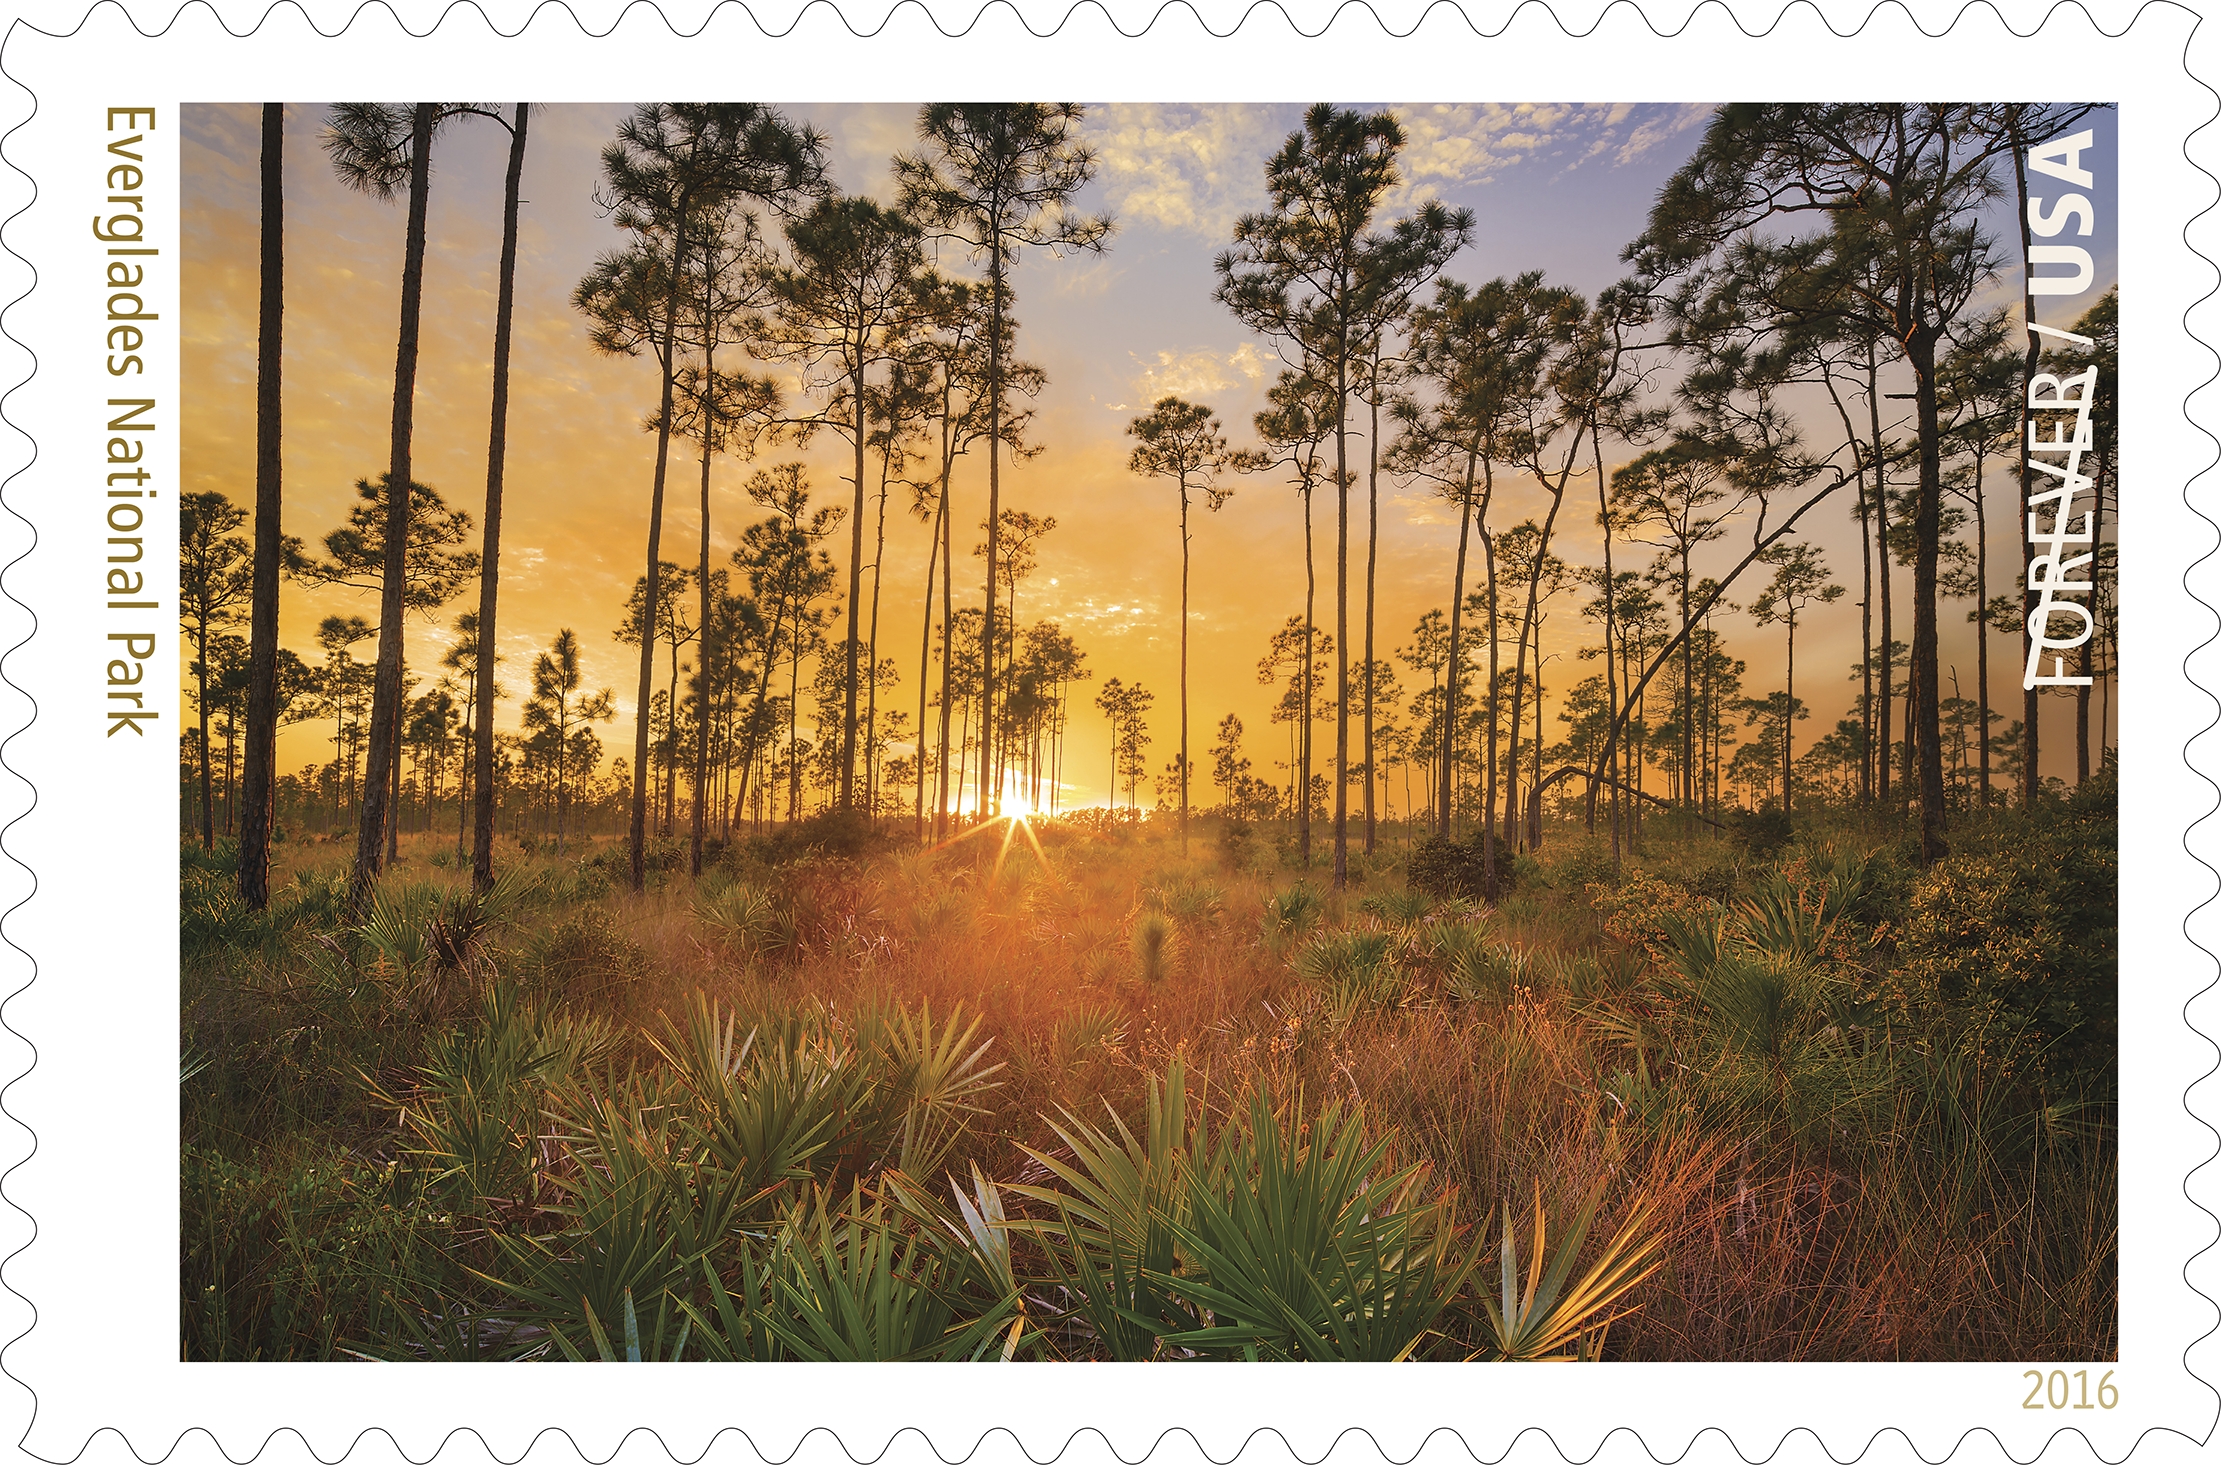 6th of 16 National Parks centennial stamps features Everglades National Park